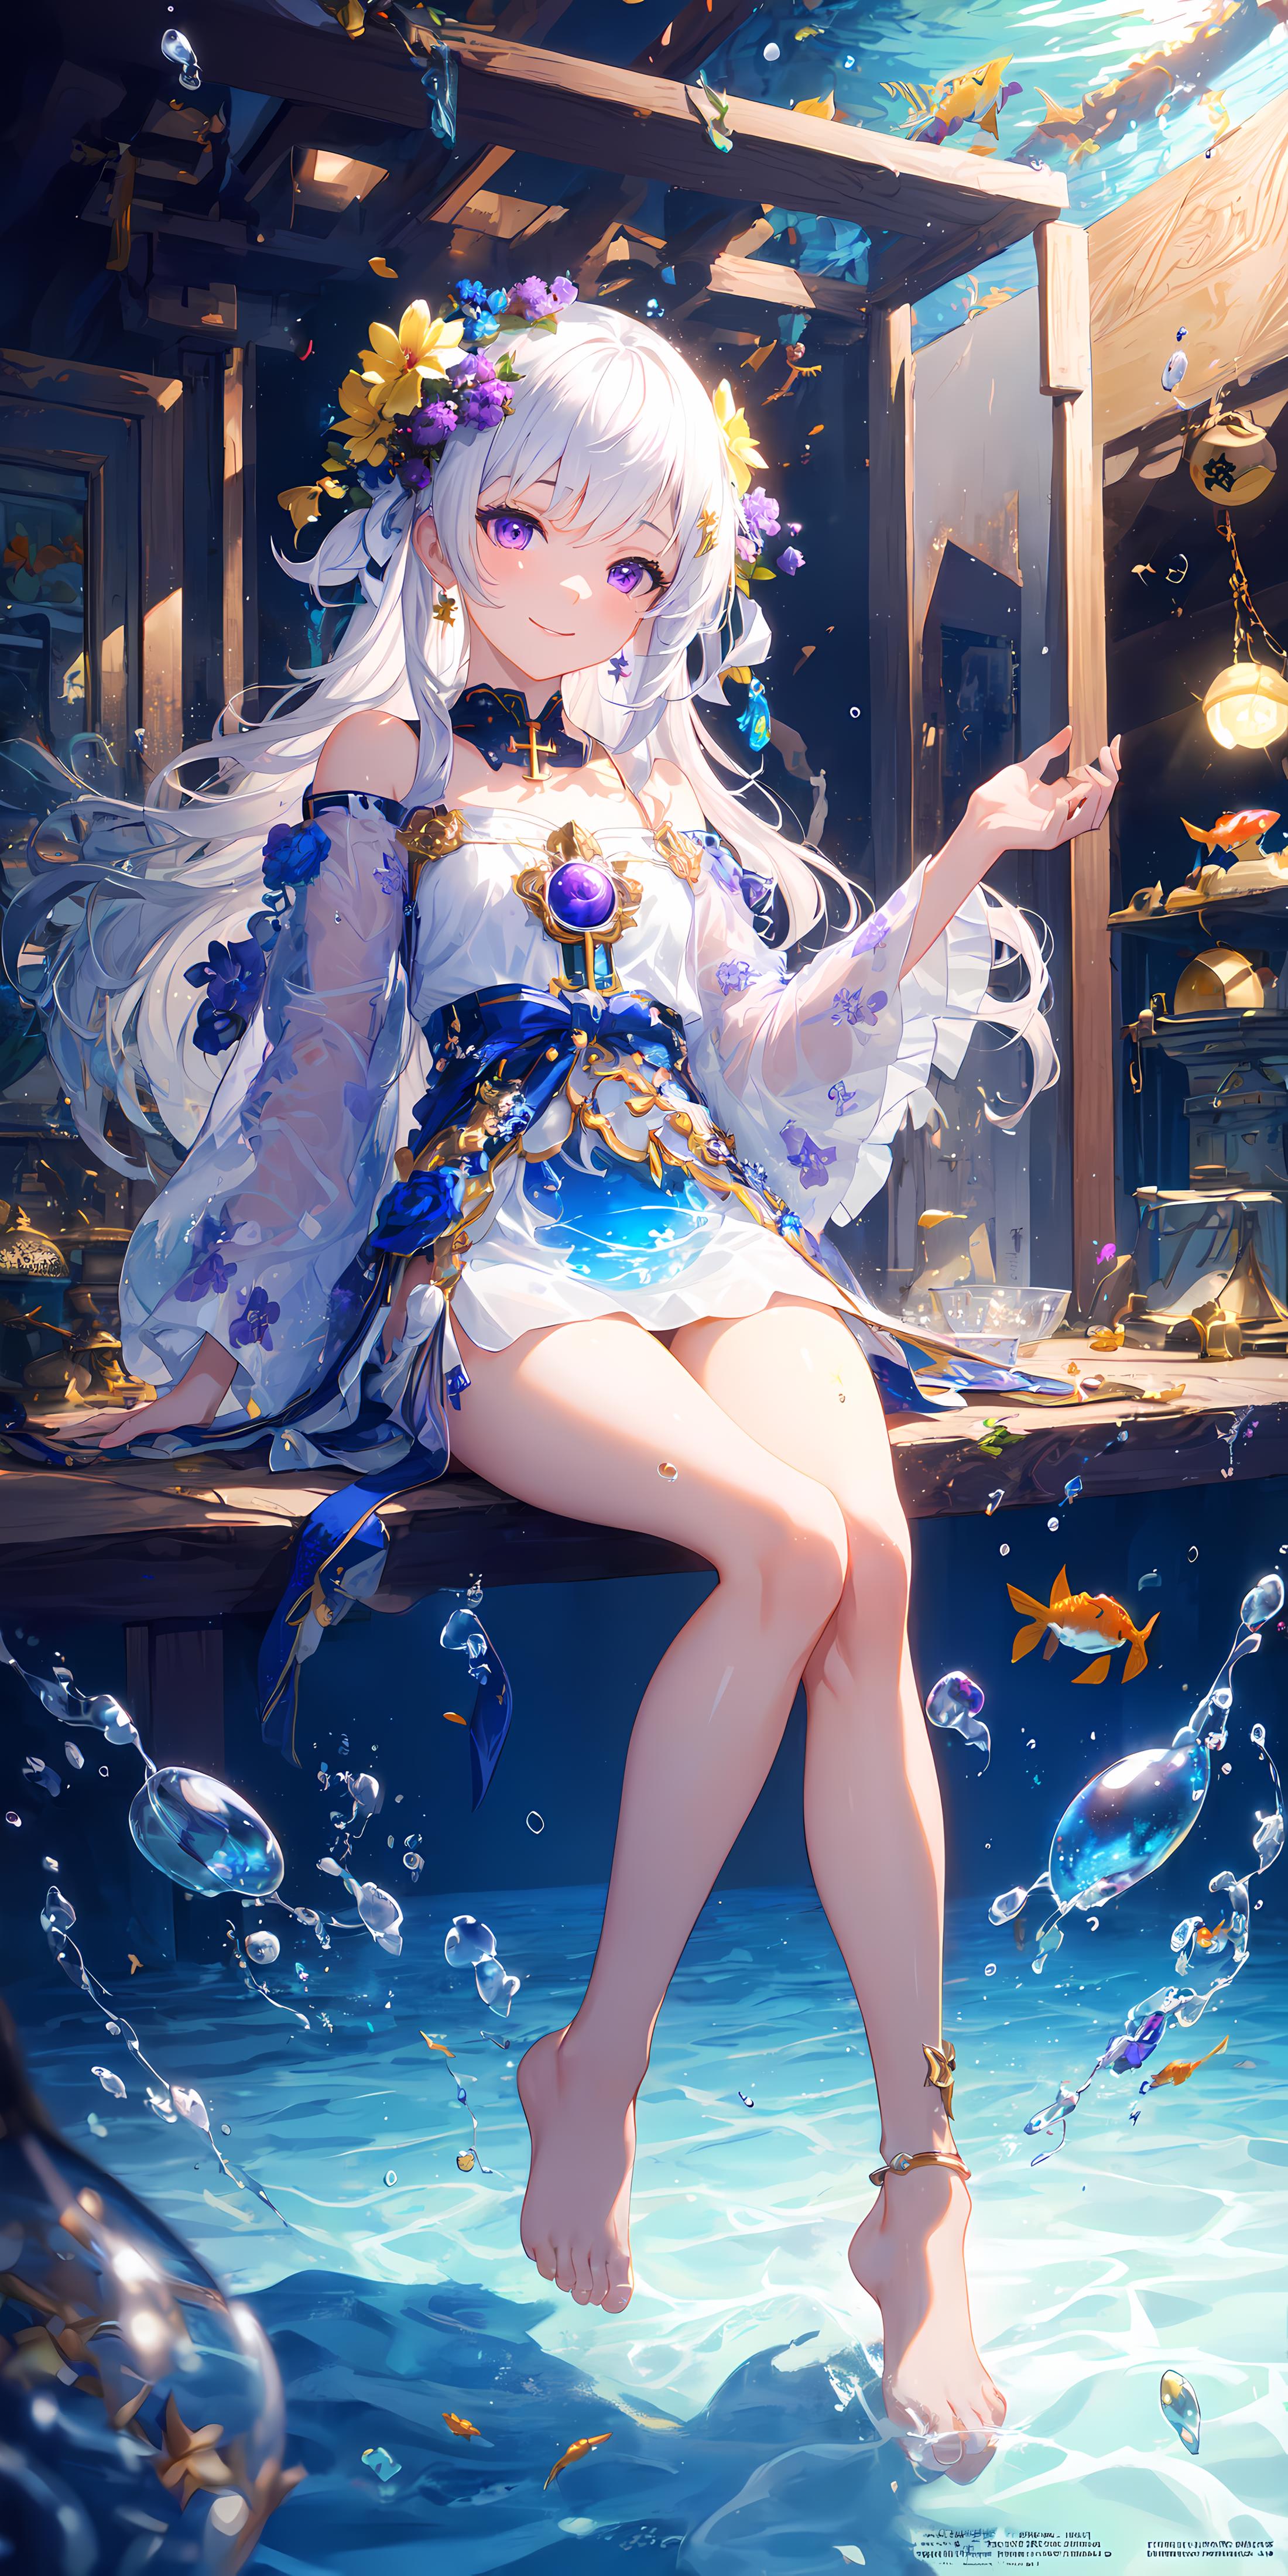 An anime-style painting of a blonde woman in a white and blue dress sitting on a bench surrounded by water and various sea creatures, including fish and a crab.